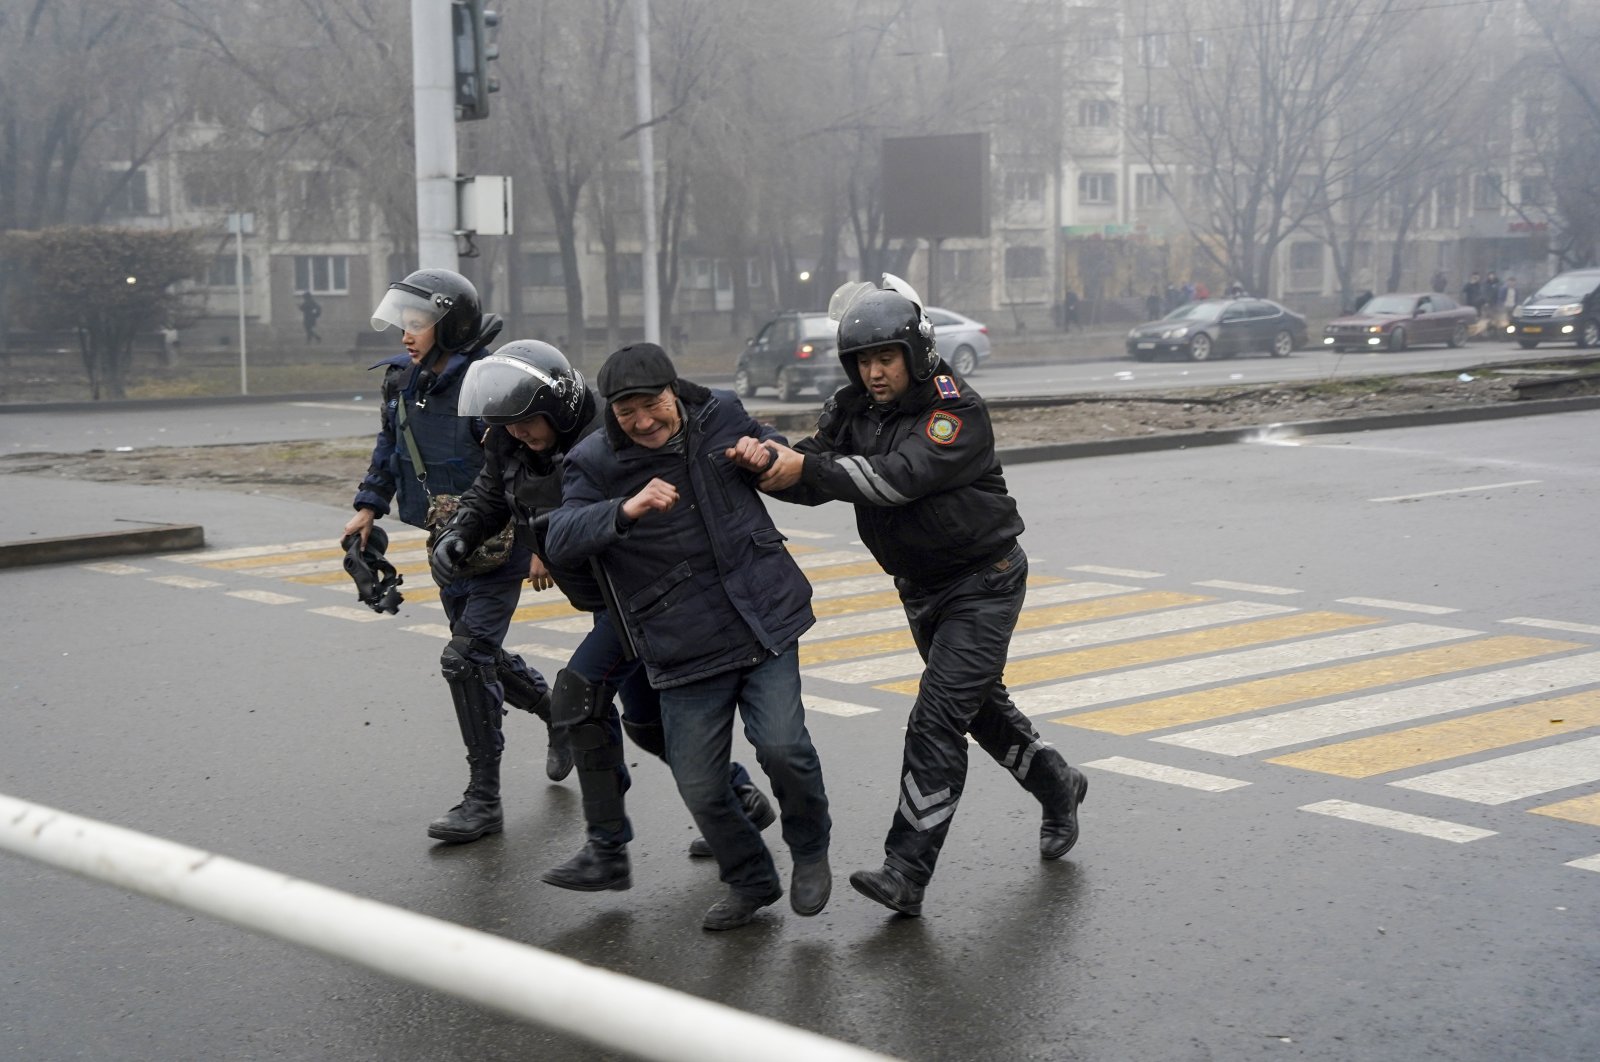 Police officers detain a demonstrator during a protest in Almaty, Kazakhstan, Jan. 5, 2022. (AP Photo)